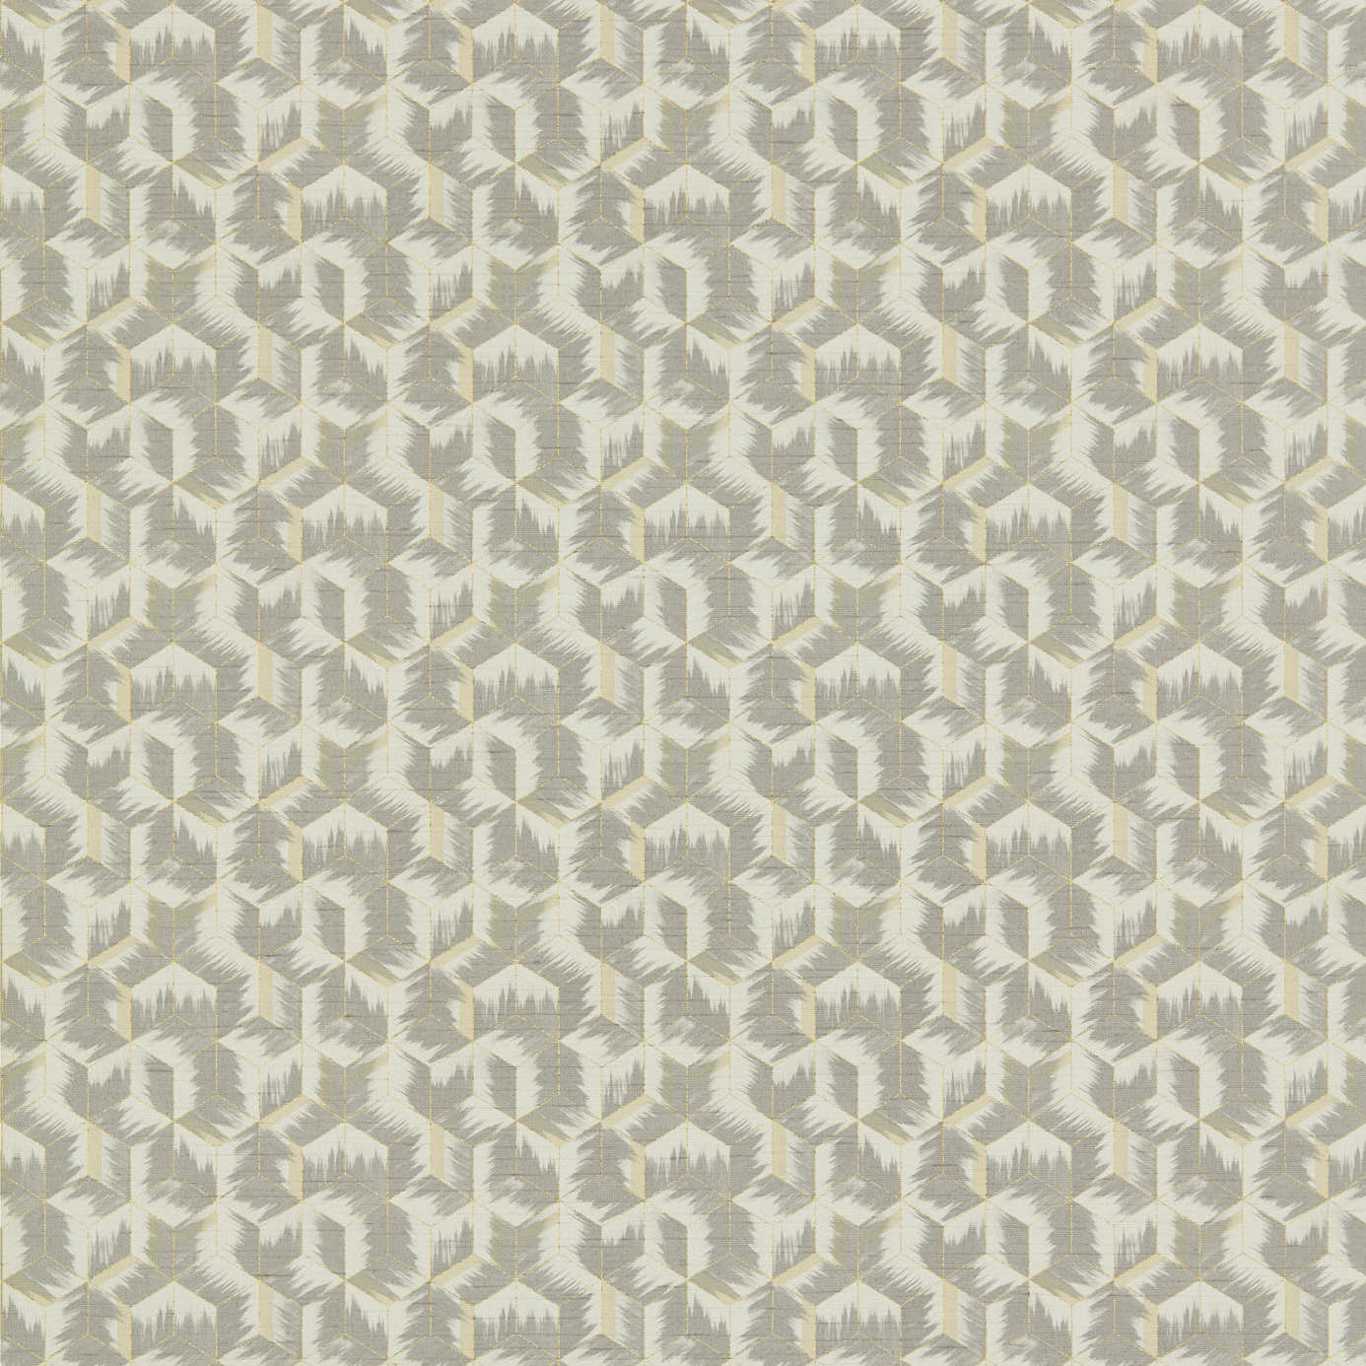 Tumbling Blocks Faded Anthracite Wallpaper by ZOF